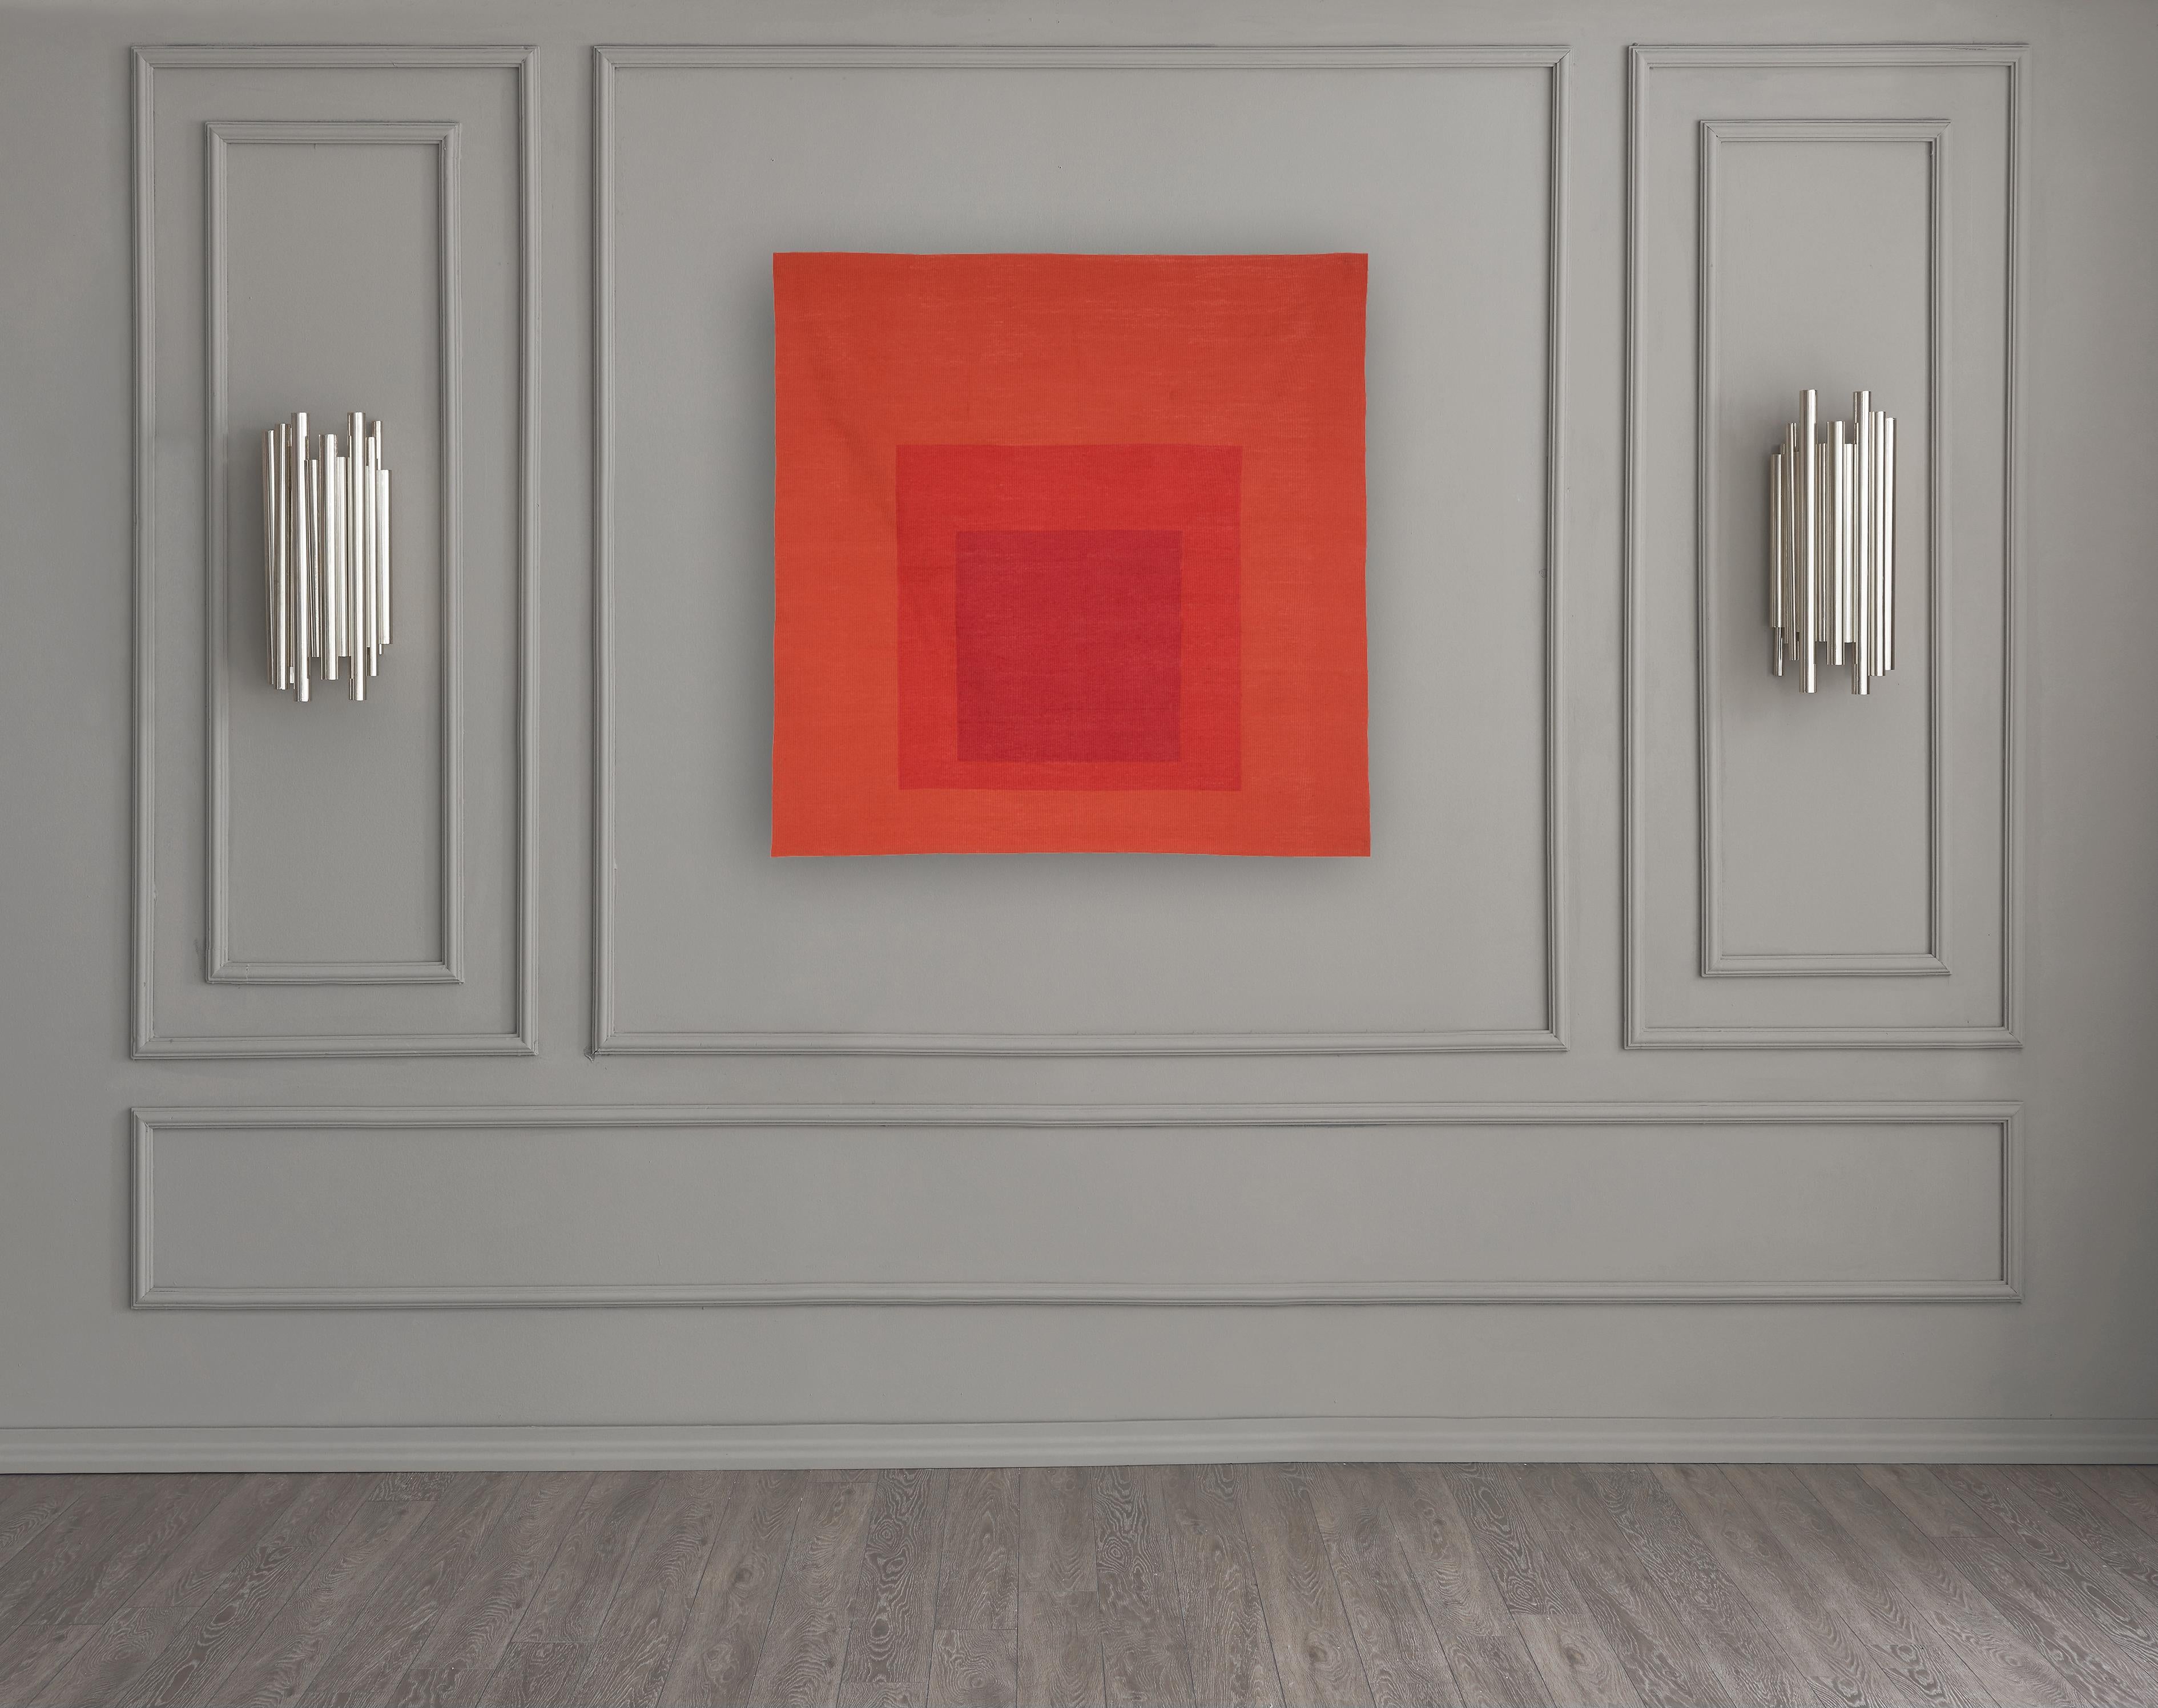 British Homage to the Square, Less and More 'Tapestry' by Josef Albers